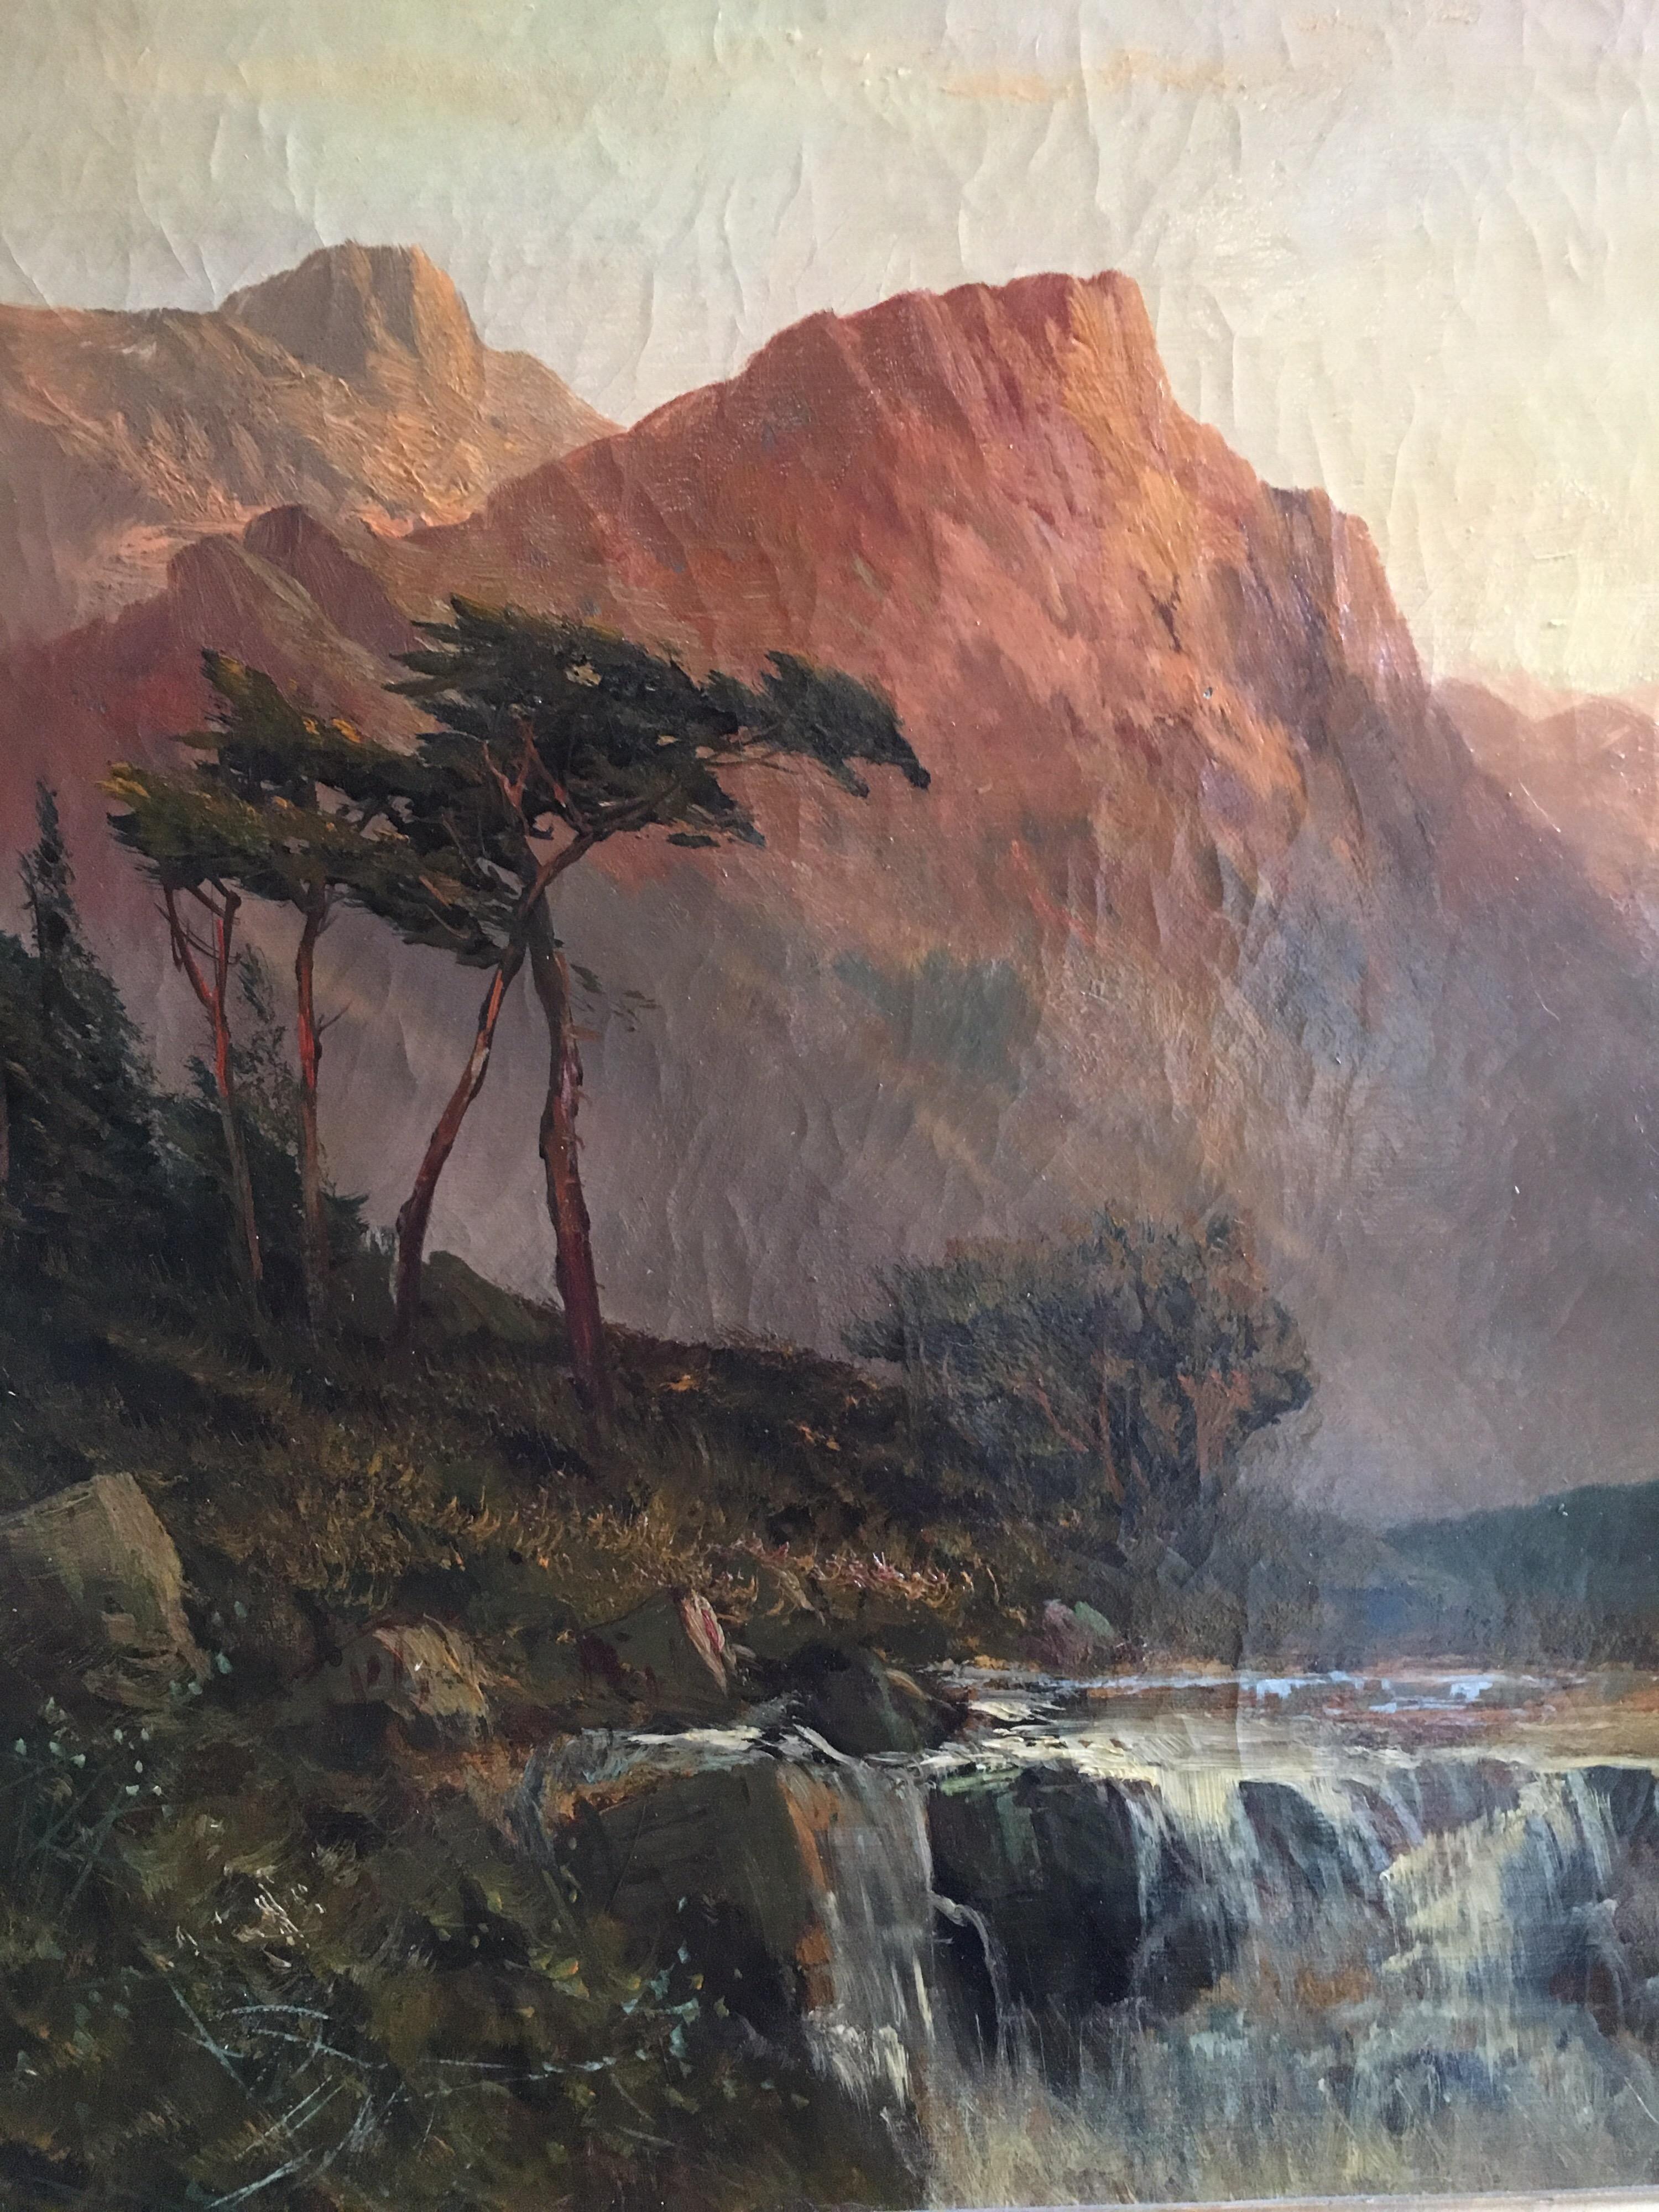 Waterfall at Sunset
by F. E. Jamieson (British 1895-1950)
Signed on the lower right hand corner
oil painting on canvas, framed
canvas: 20 x 30 inches
framed size: 24 x 34 inches

Fine quality antique oil painting by the much admired and celebrated